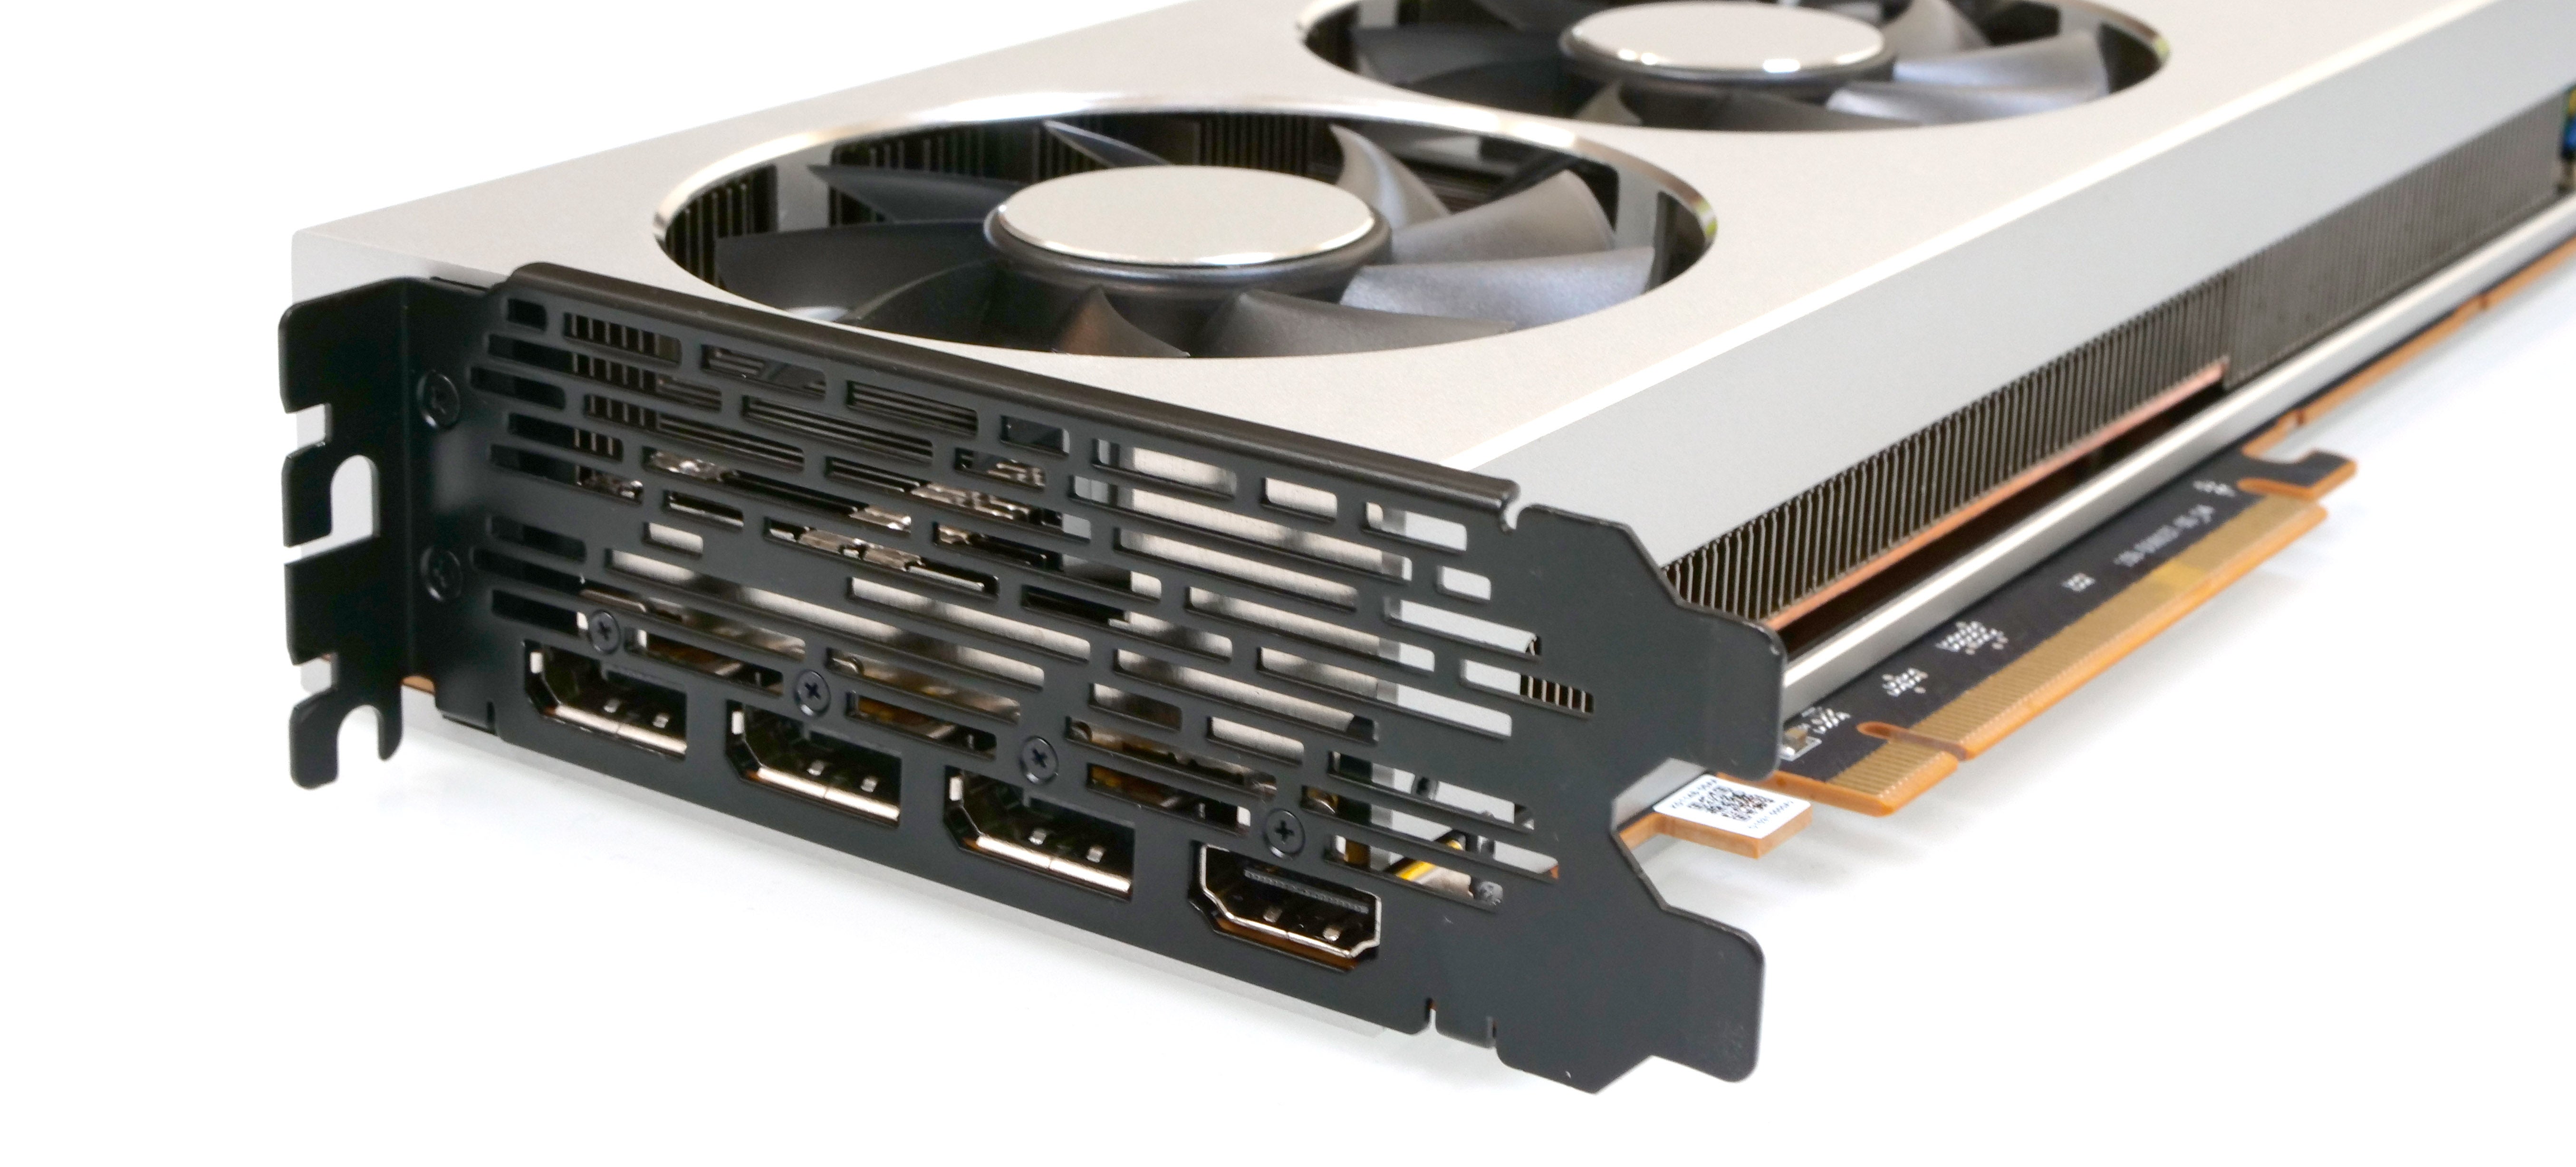 AMD Radeon 7 review: taking the fight to RTX